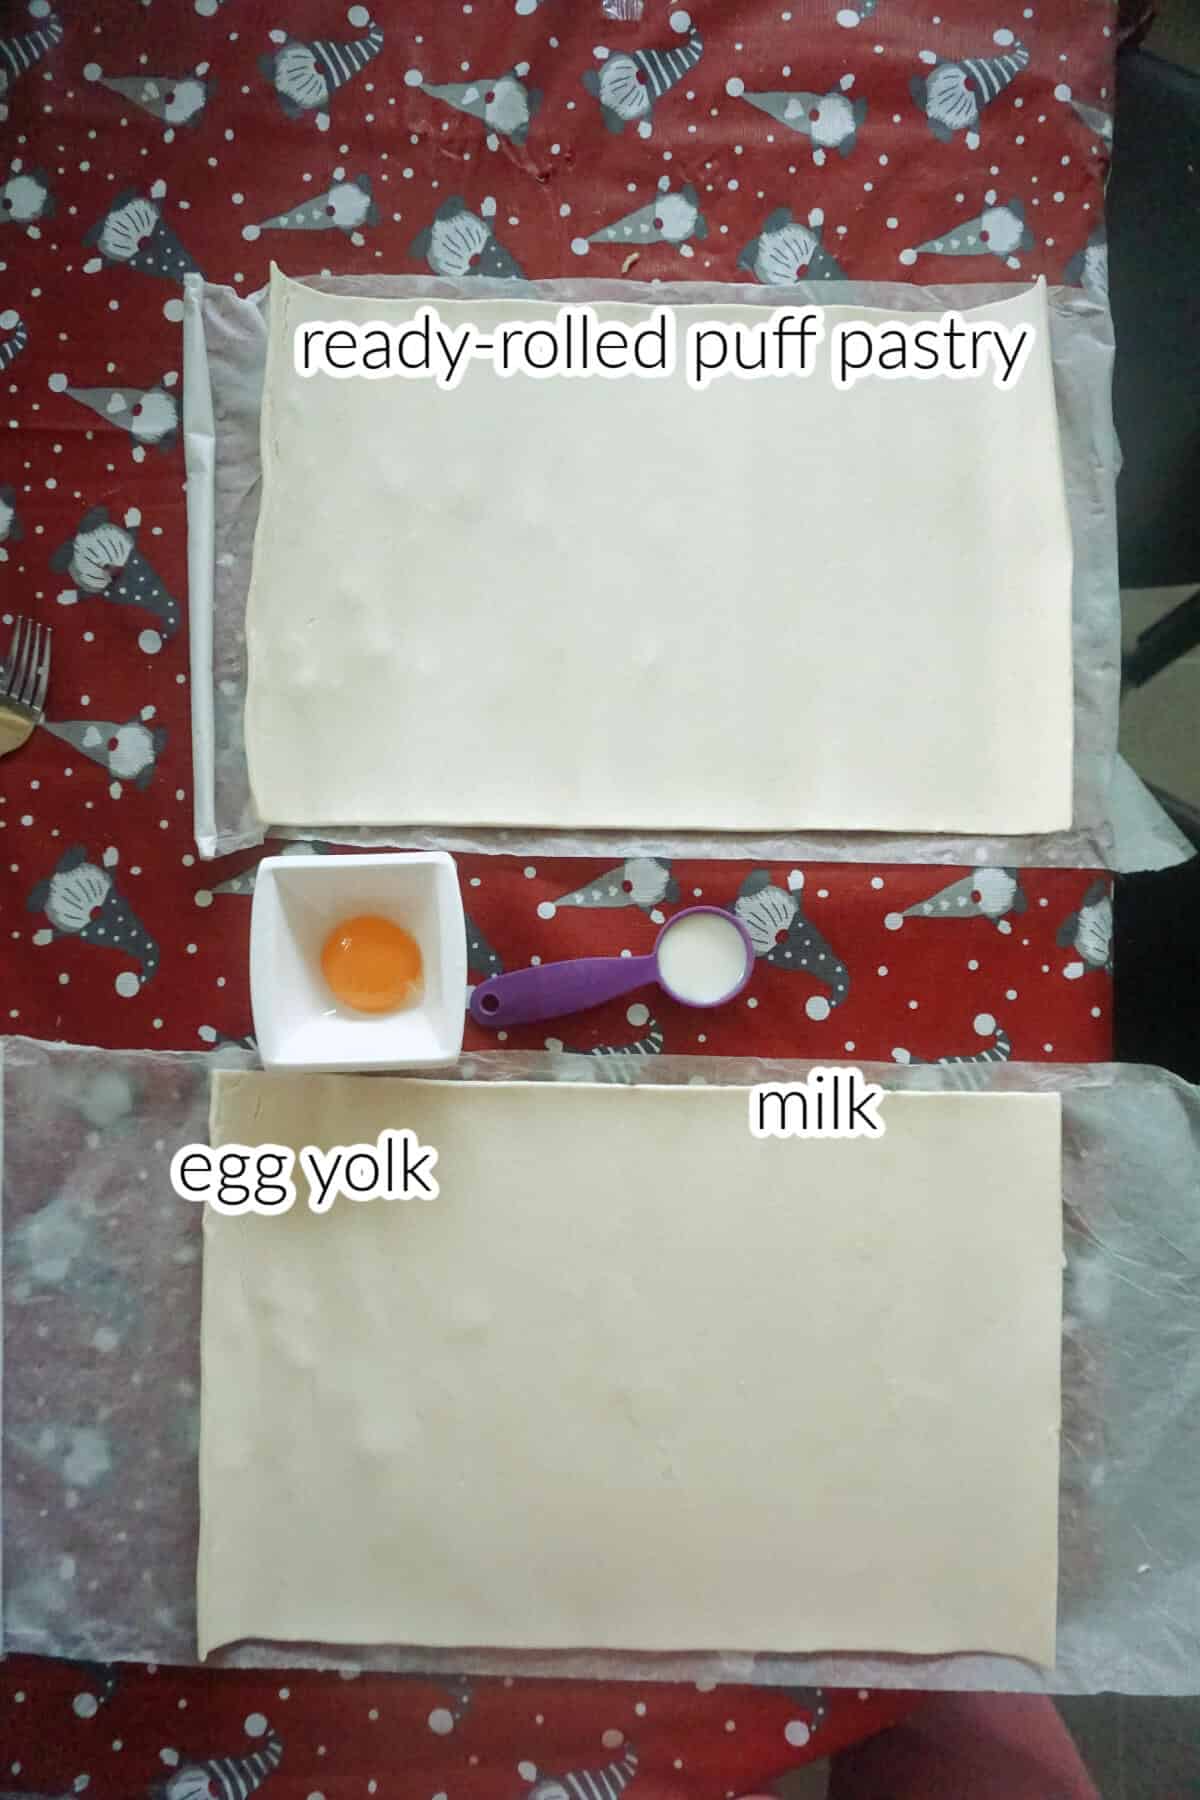 Ingredients needed to make vol-au-vent cases.